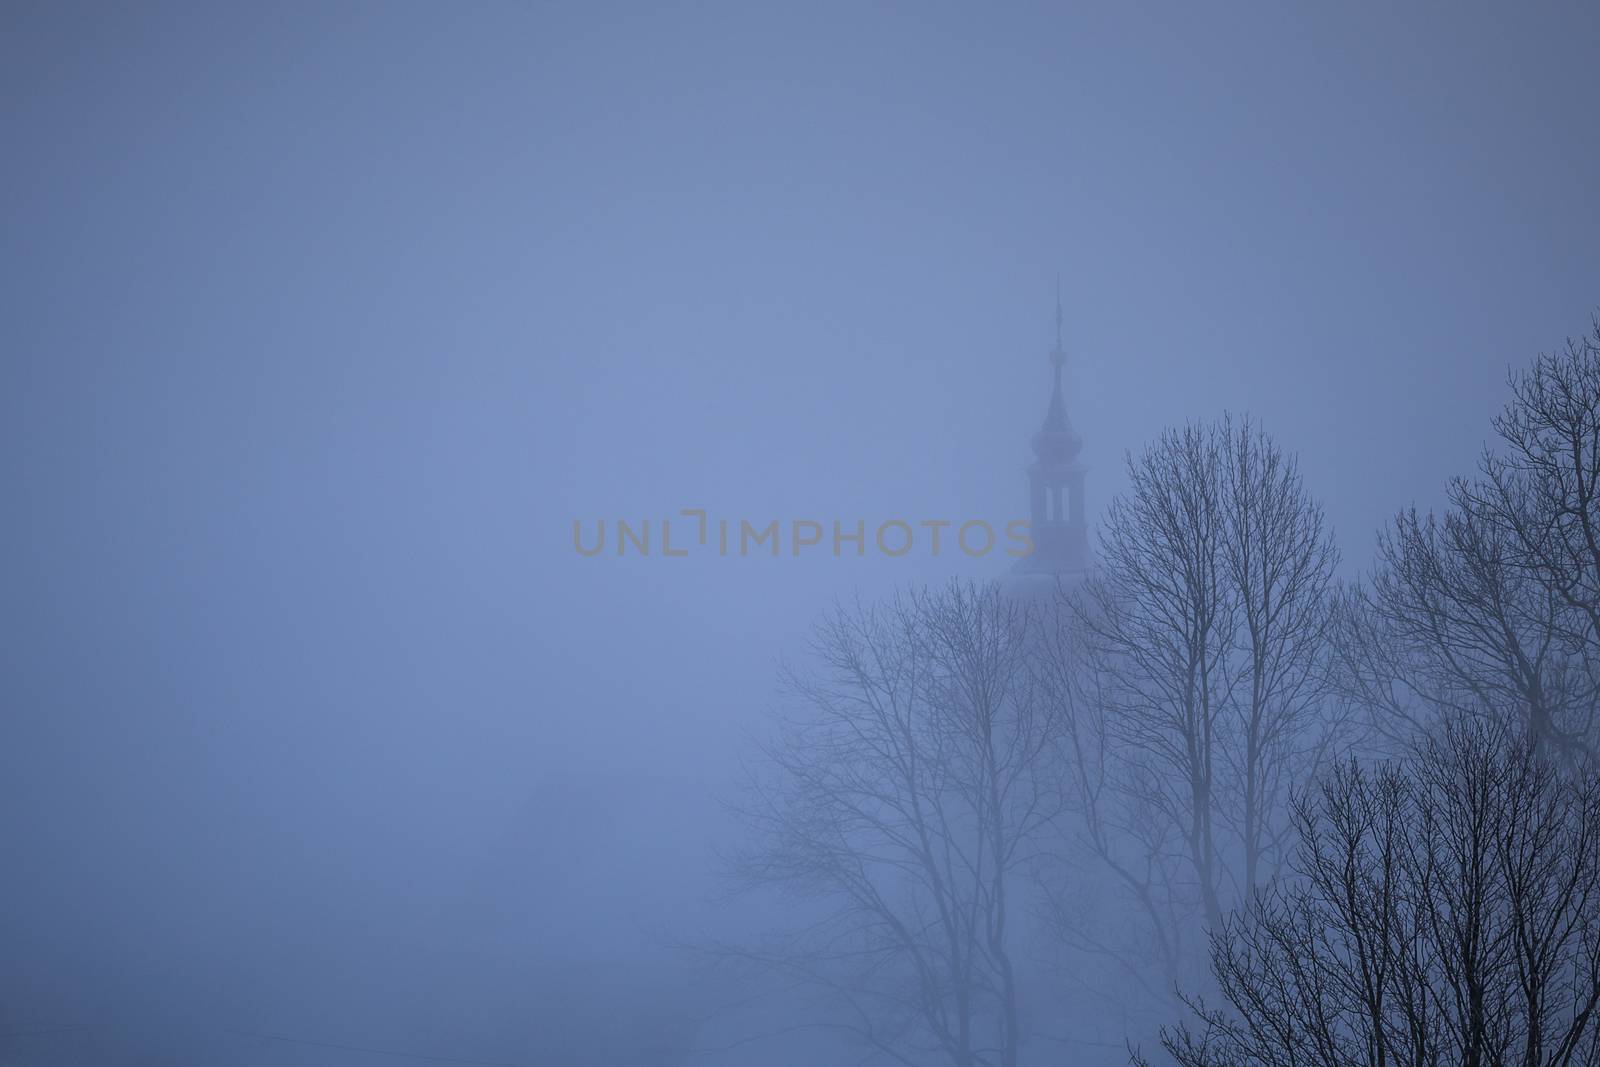 Foggy landscape, small village with church and tree silhouette on a fog at sunrise, Czech Republic